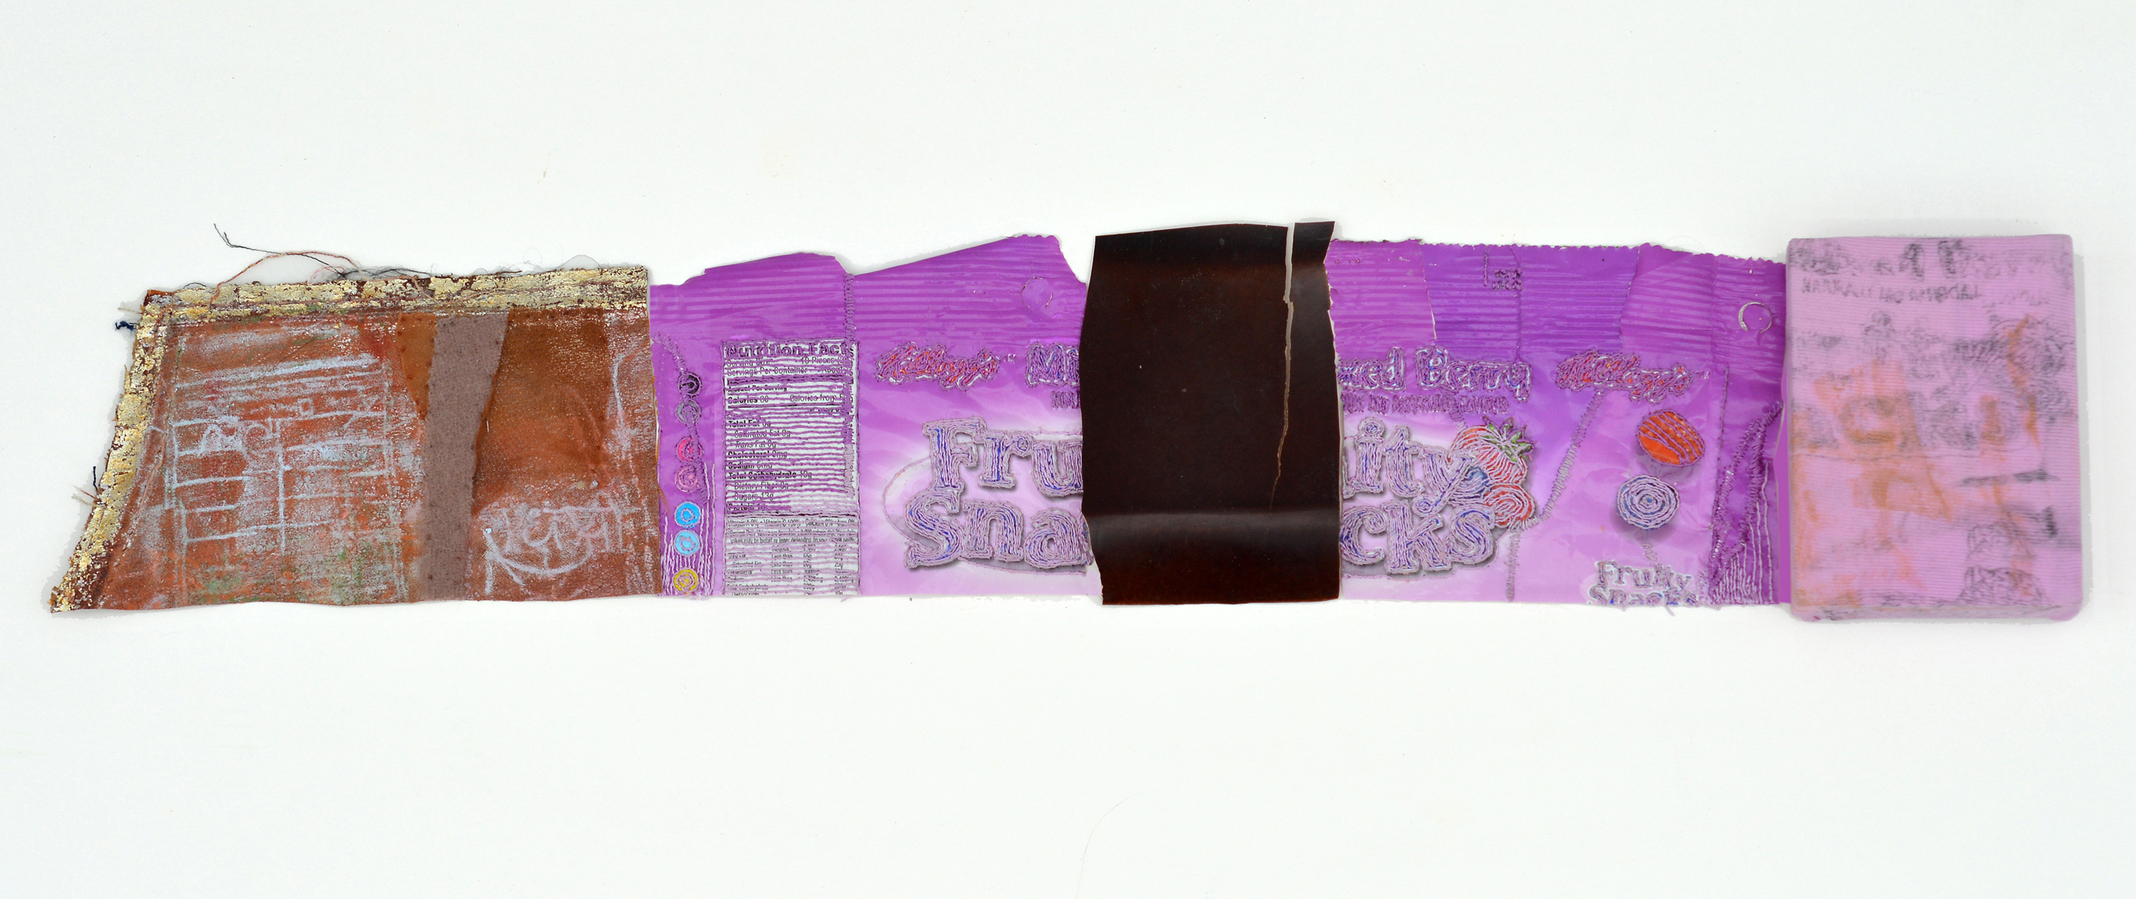 Nicola Ginzel  Selected Flatwork graphite frottage on bathing suit remnant, pastel frottage on leather purse remnant, wrapper embroidered by hand, veneer remnant